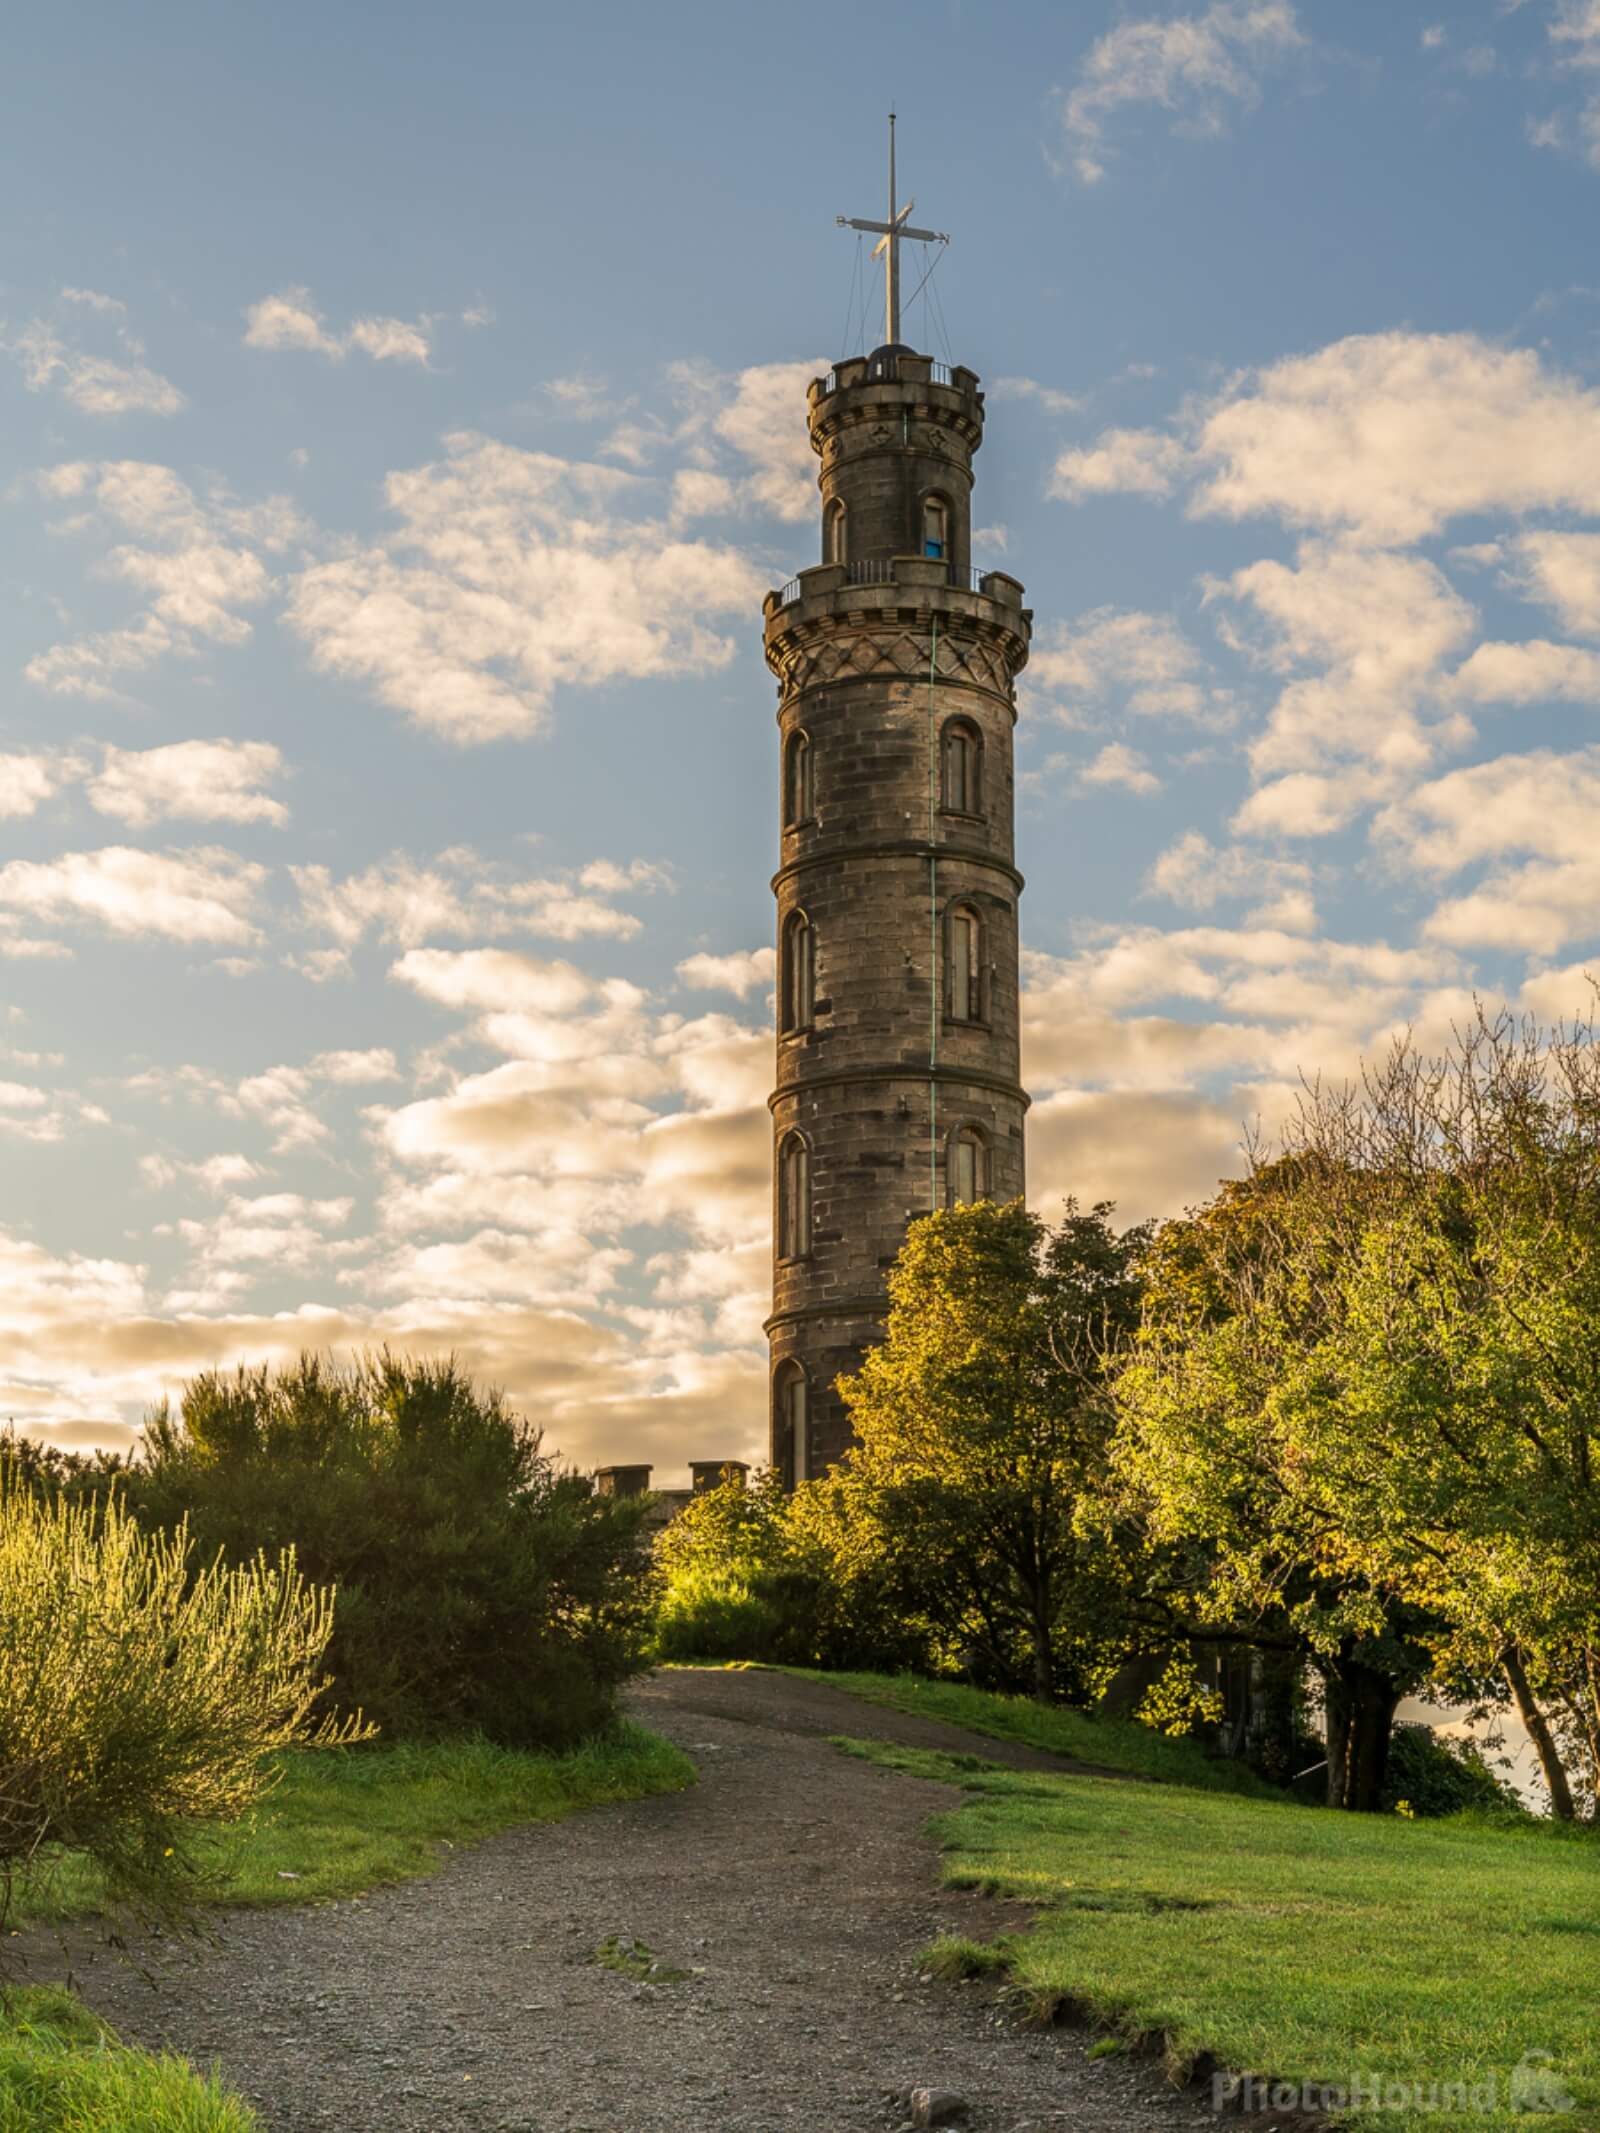 Image of Calton Hill by James Billings.